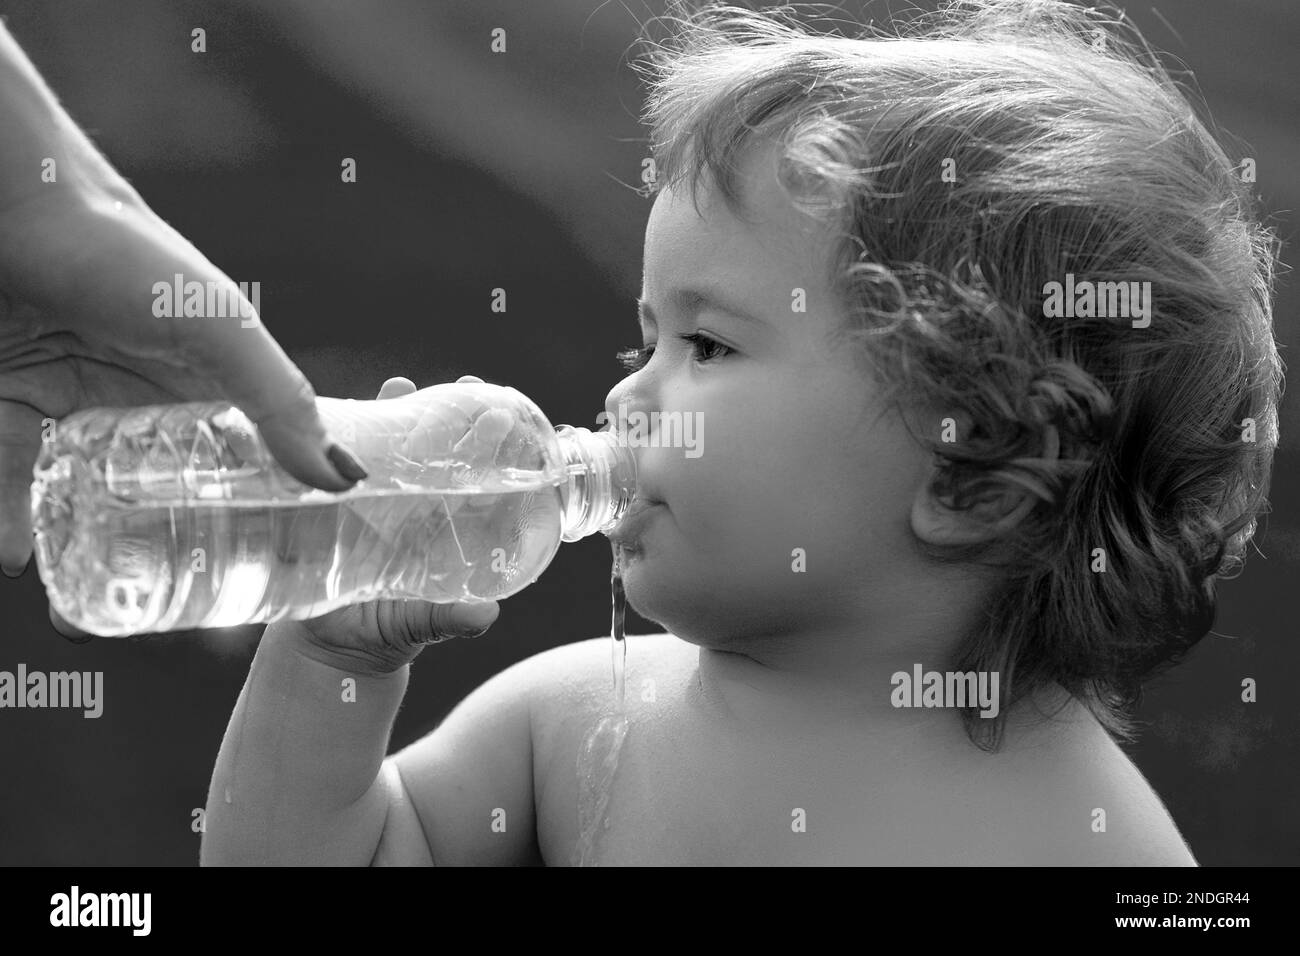 Baby kids drinking water from mother hands. Baby boy with curly blond hair drinking water in the park, holding plastic bottle, outdoor. Stock Photo